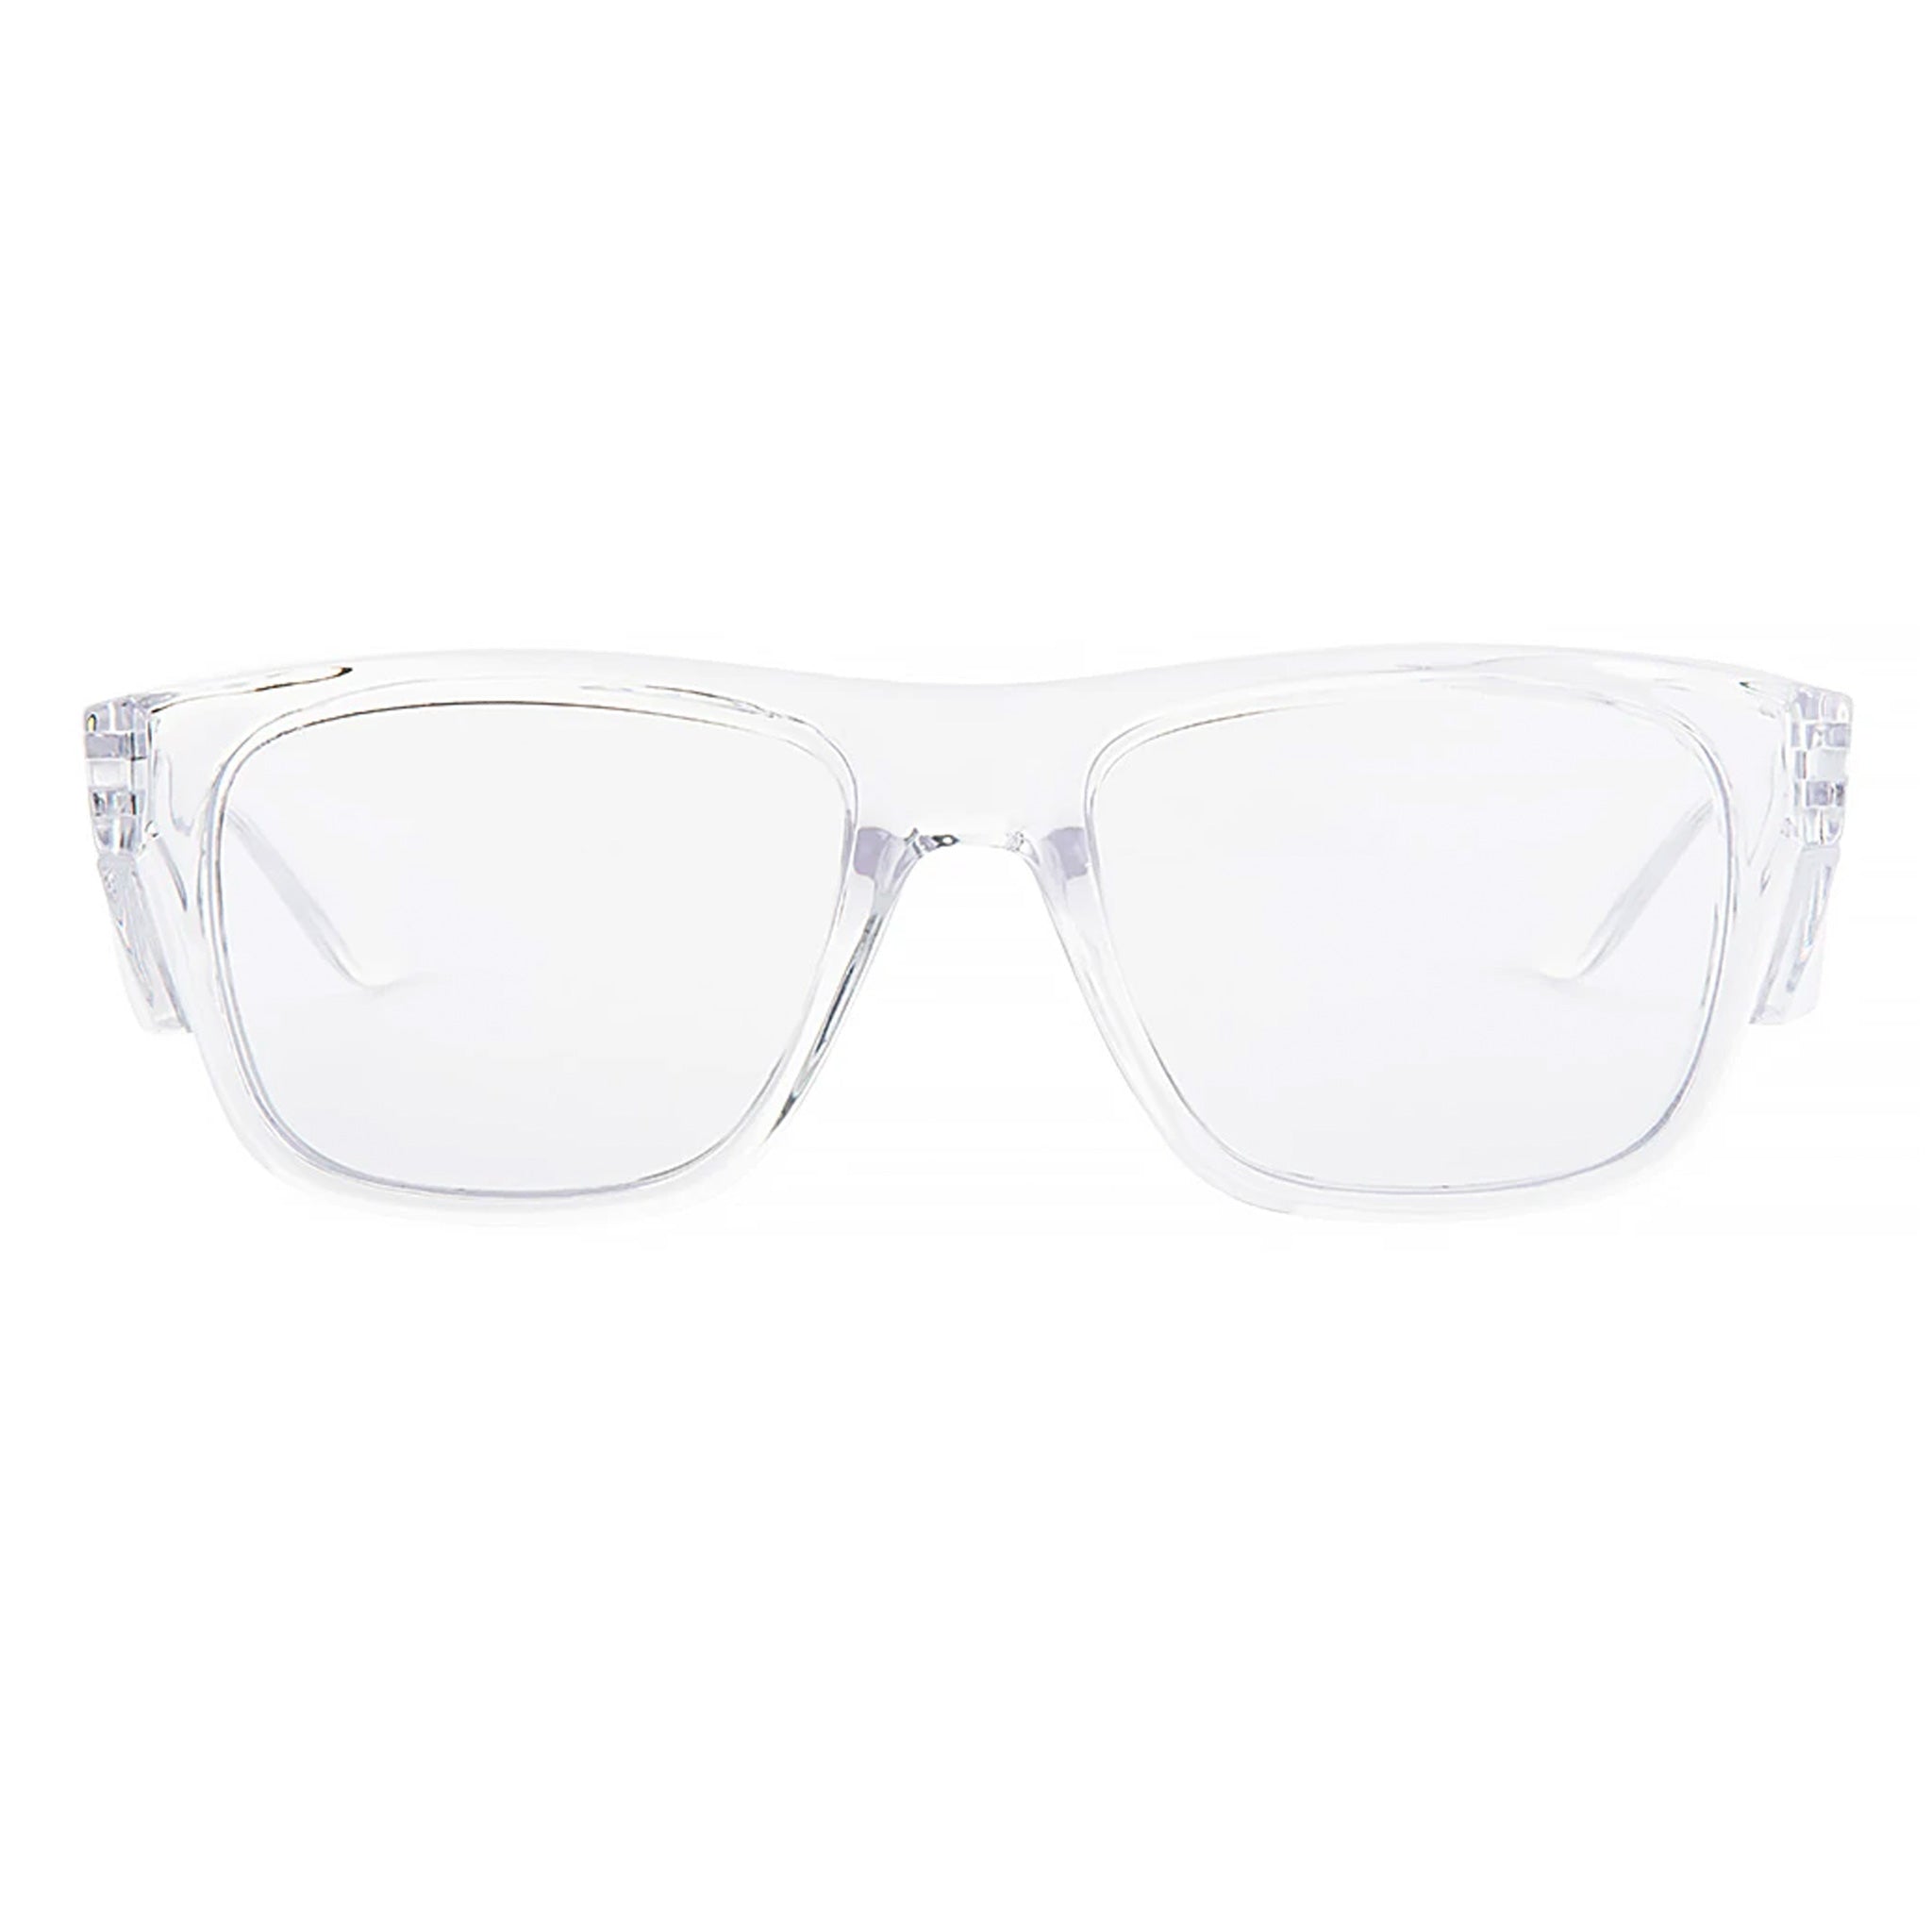 safe style fusions clear frame glasses with clear lens